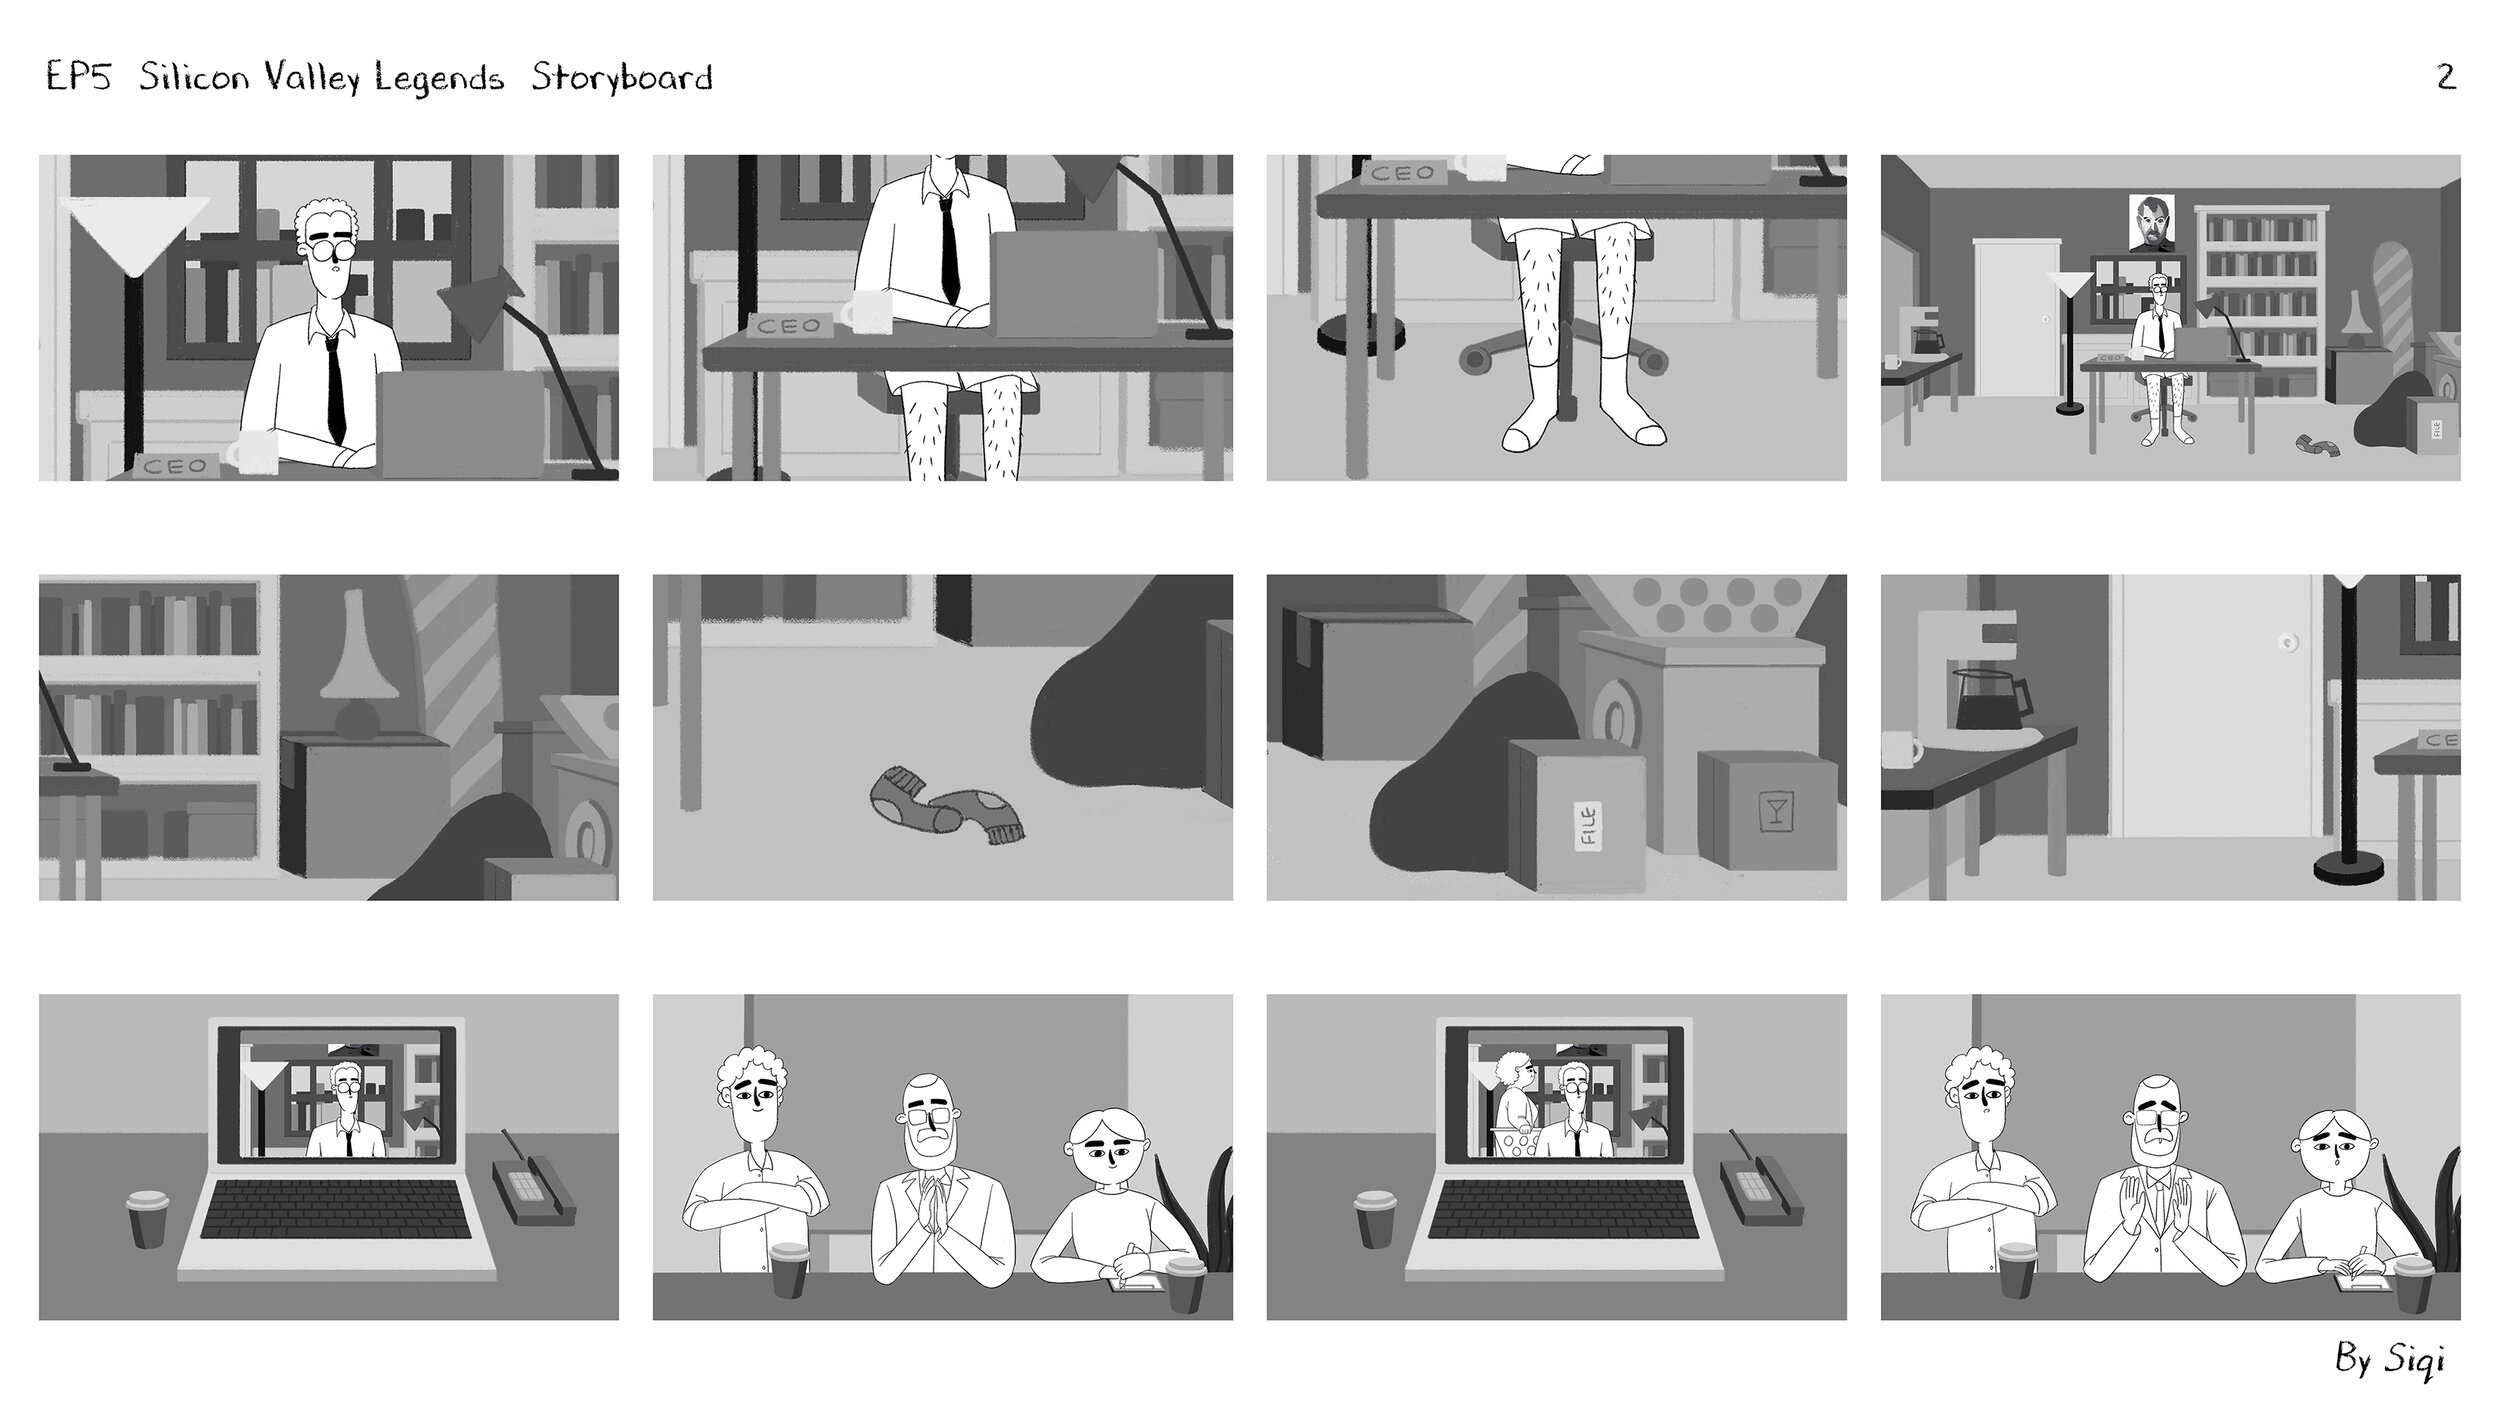 EP5_Silicon Valley Legends_Storyboard_Page_2.jpg